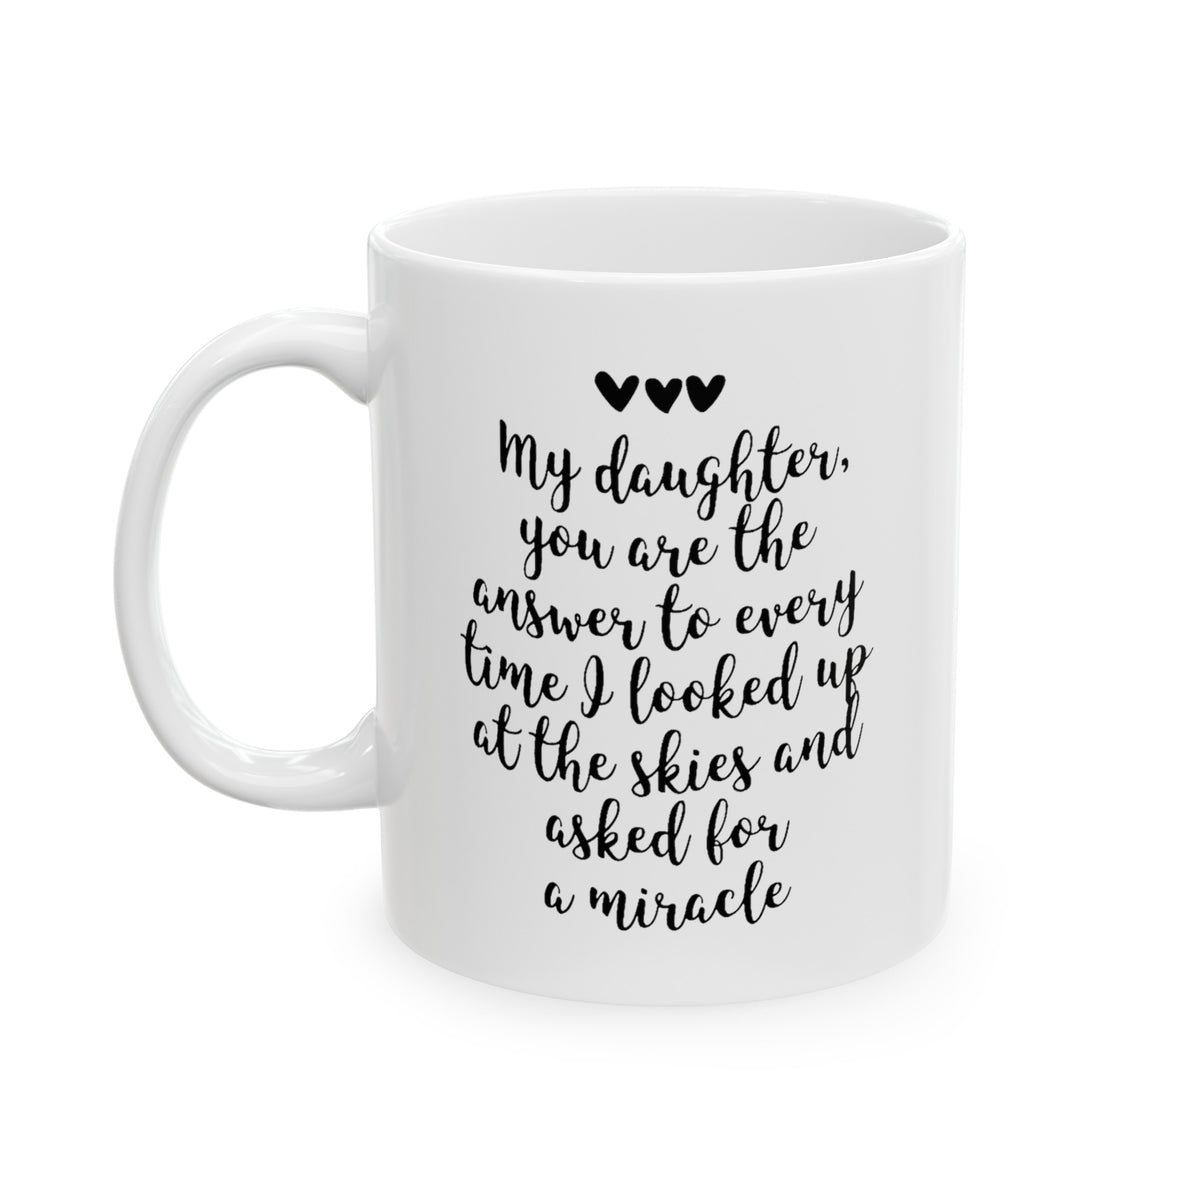 My Daughter, You Are The Answer To Every Time I Looked Up At The Skies And Asked For a Miracle Mug - Funny Dad Ceramic Coffee Cup